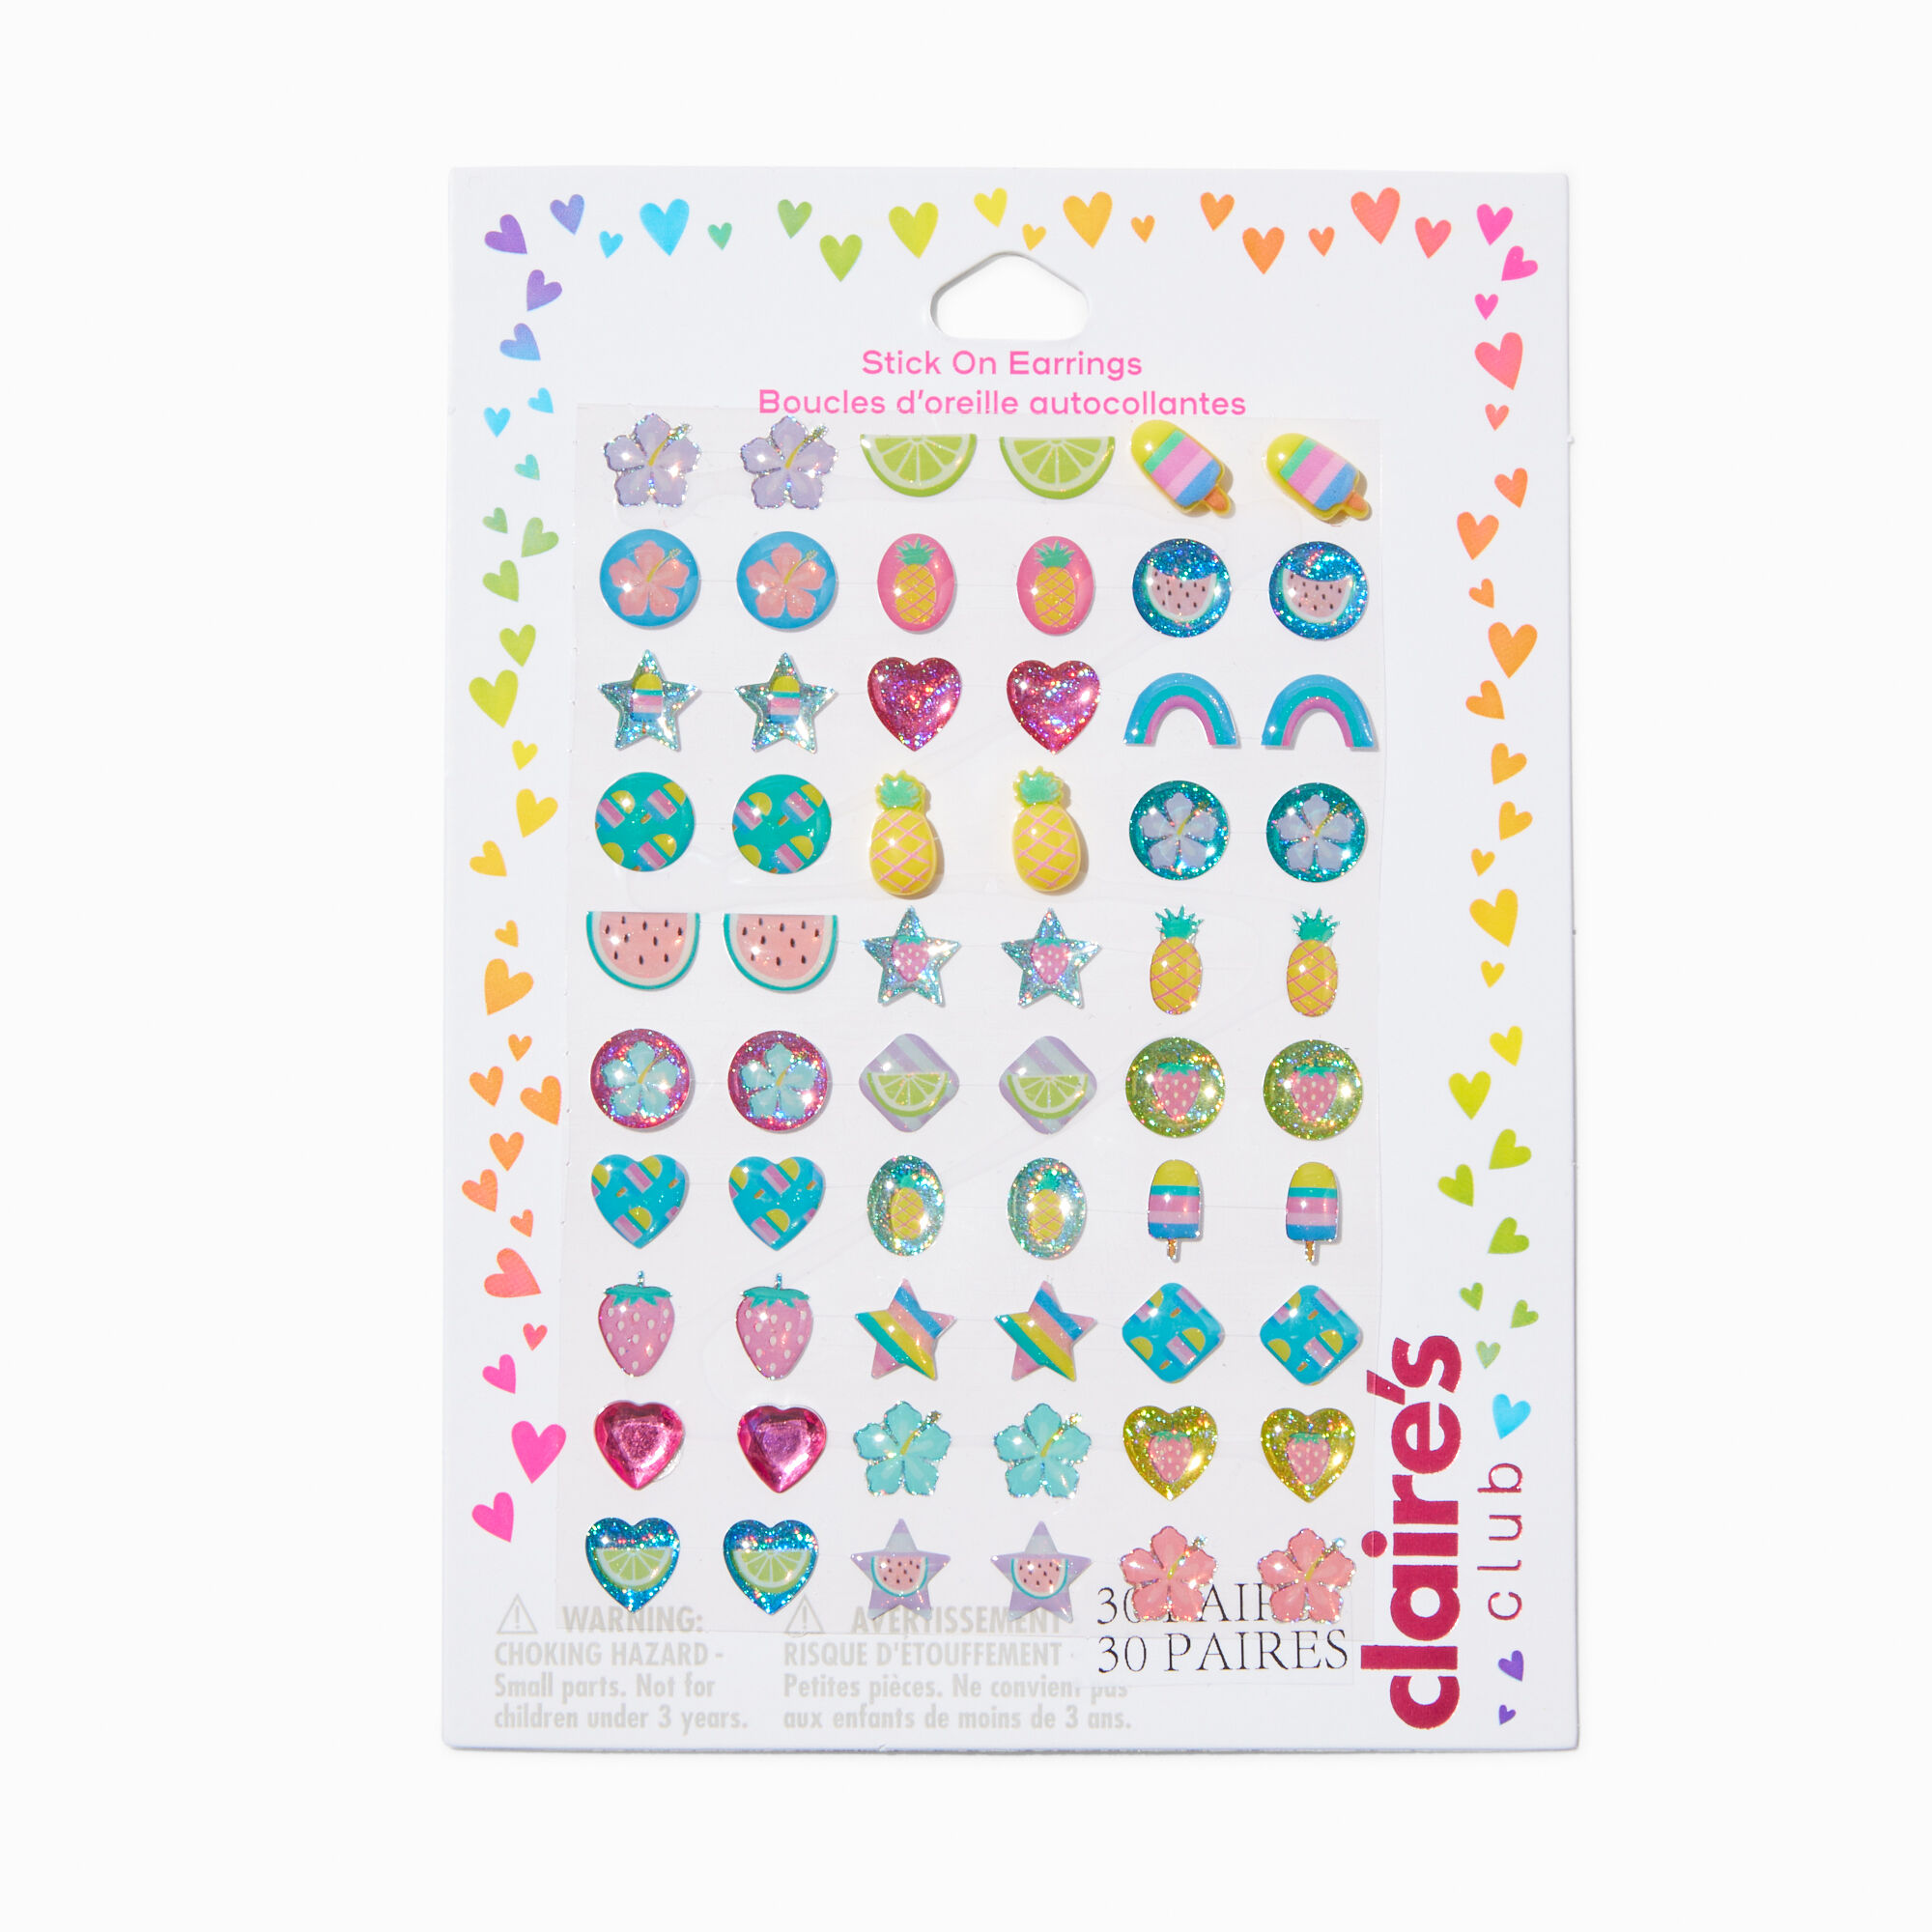 View Claires Club Summer Stick On Earrings 30 Pack information